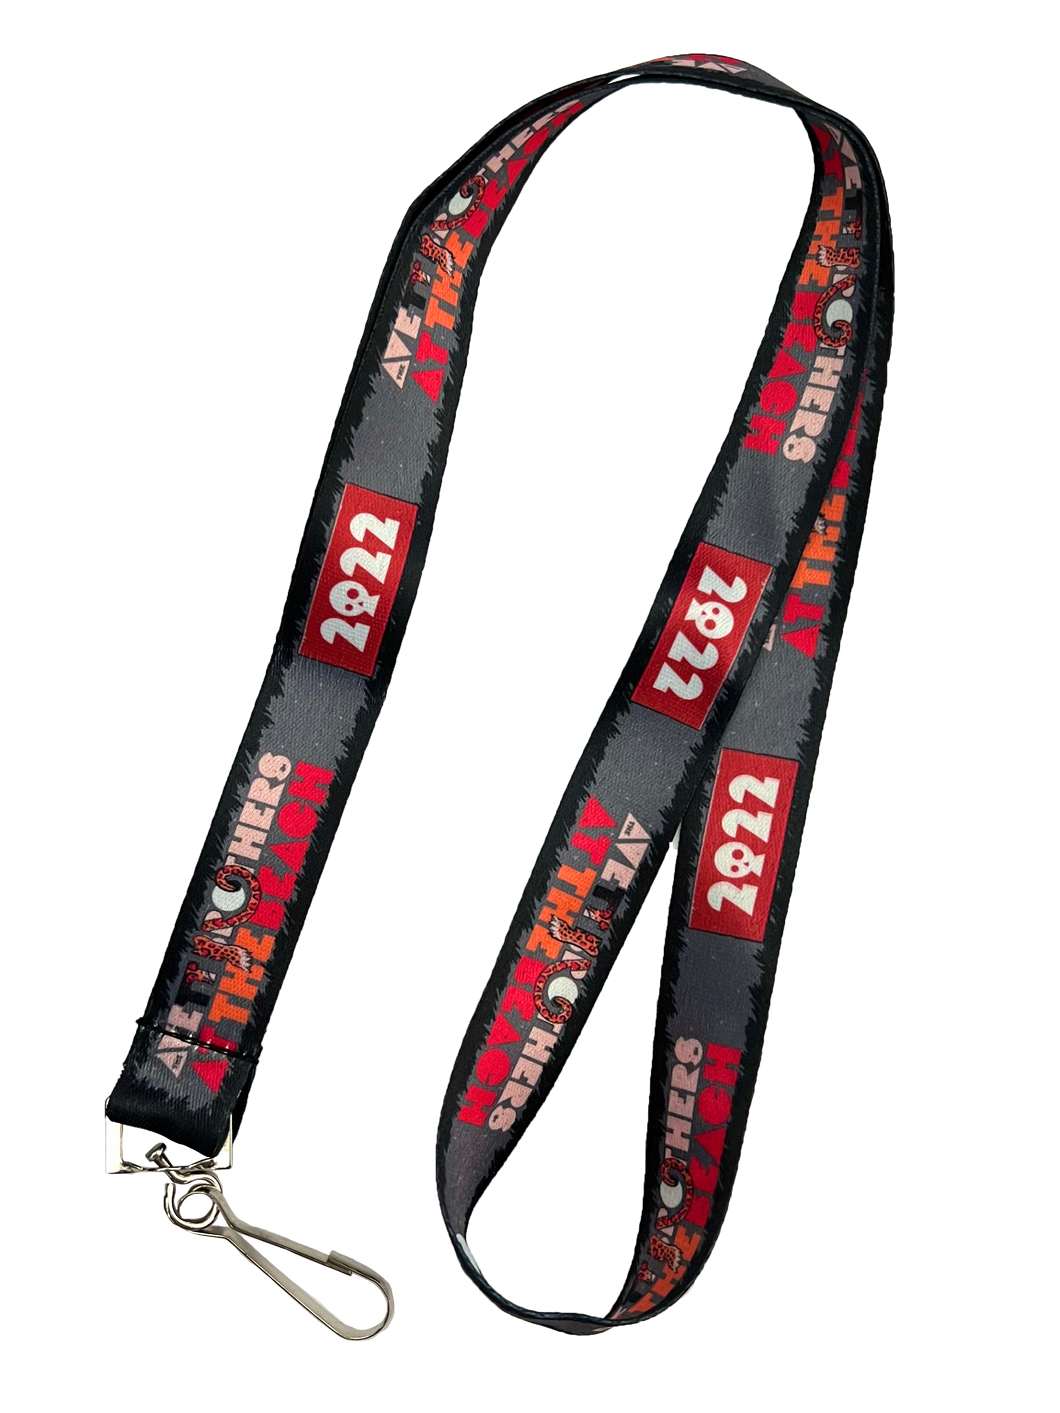 At The Beach 2022 Lanyard (Includes Shipping)